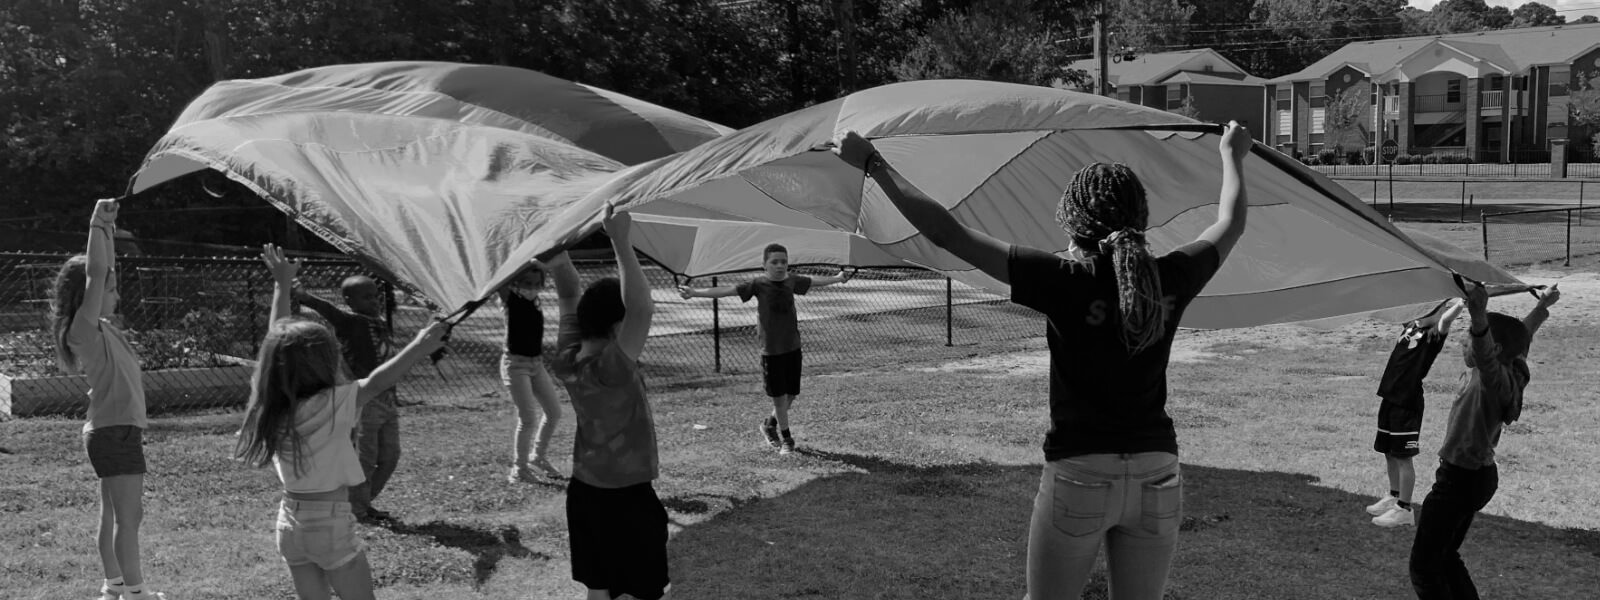 Volunteer plays parachute with a group of children.